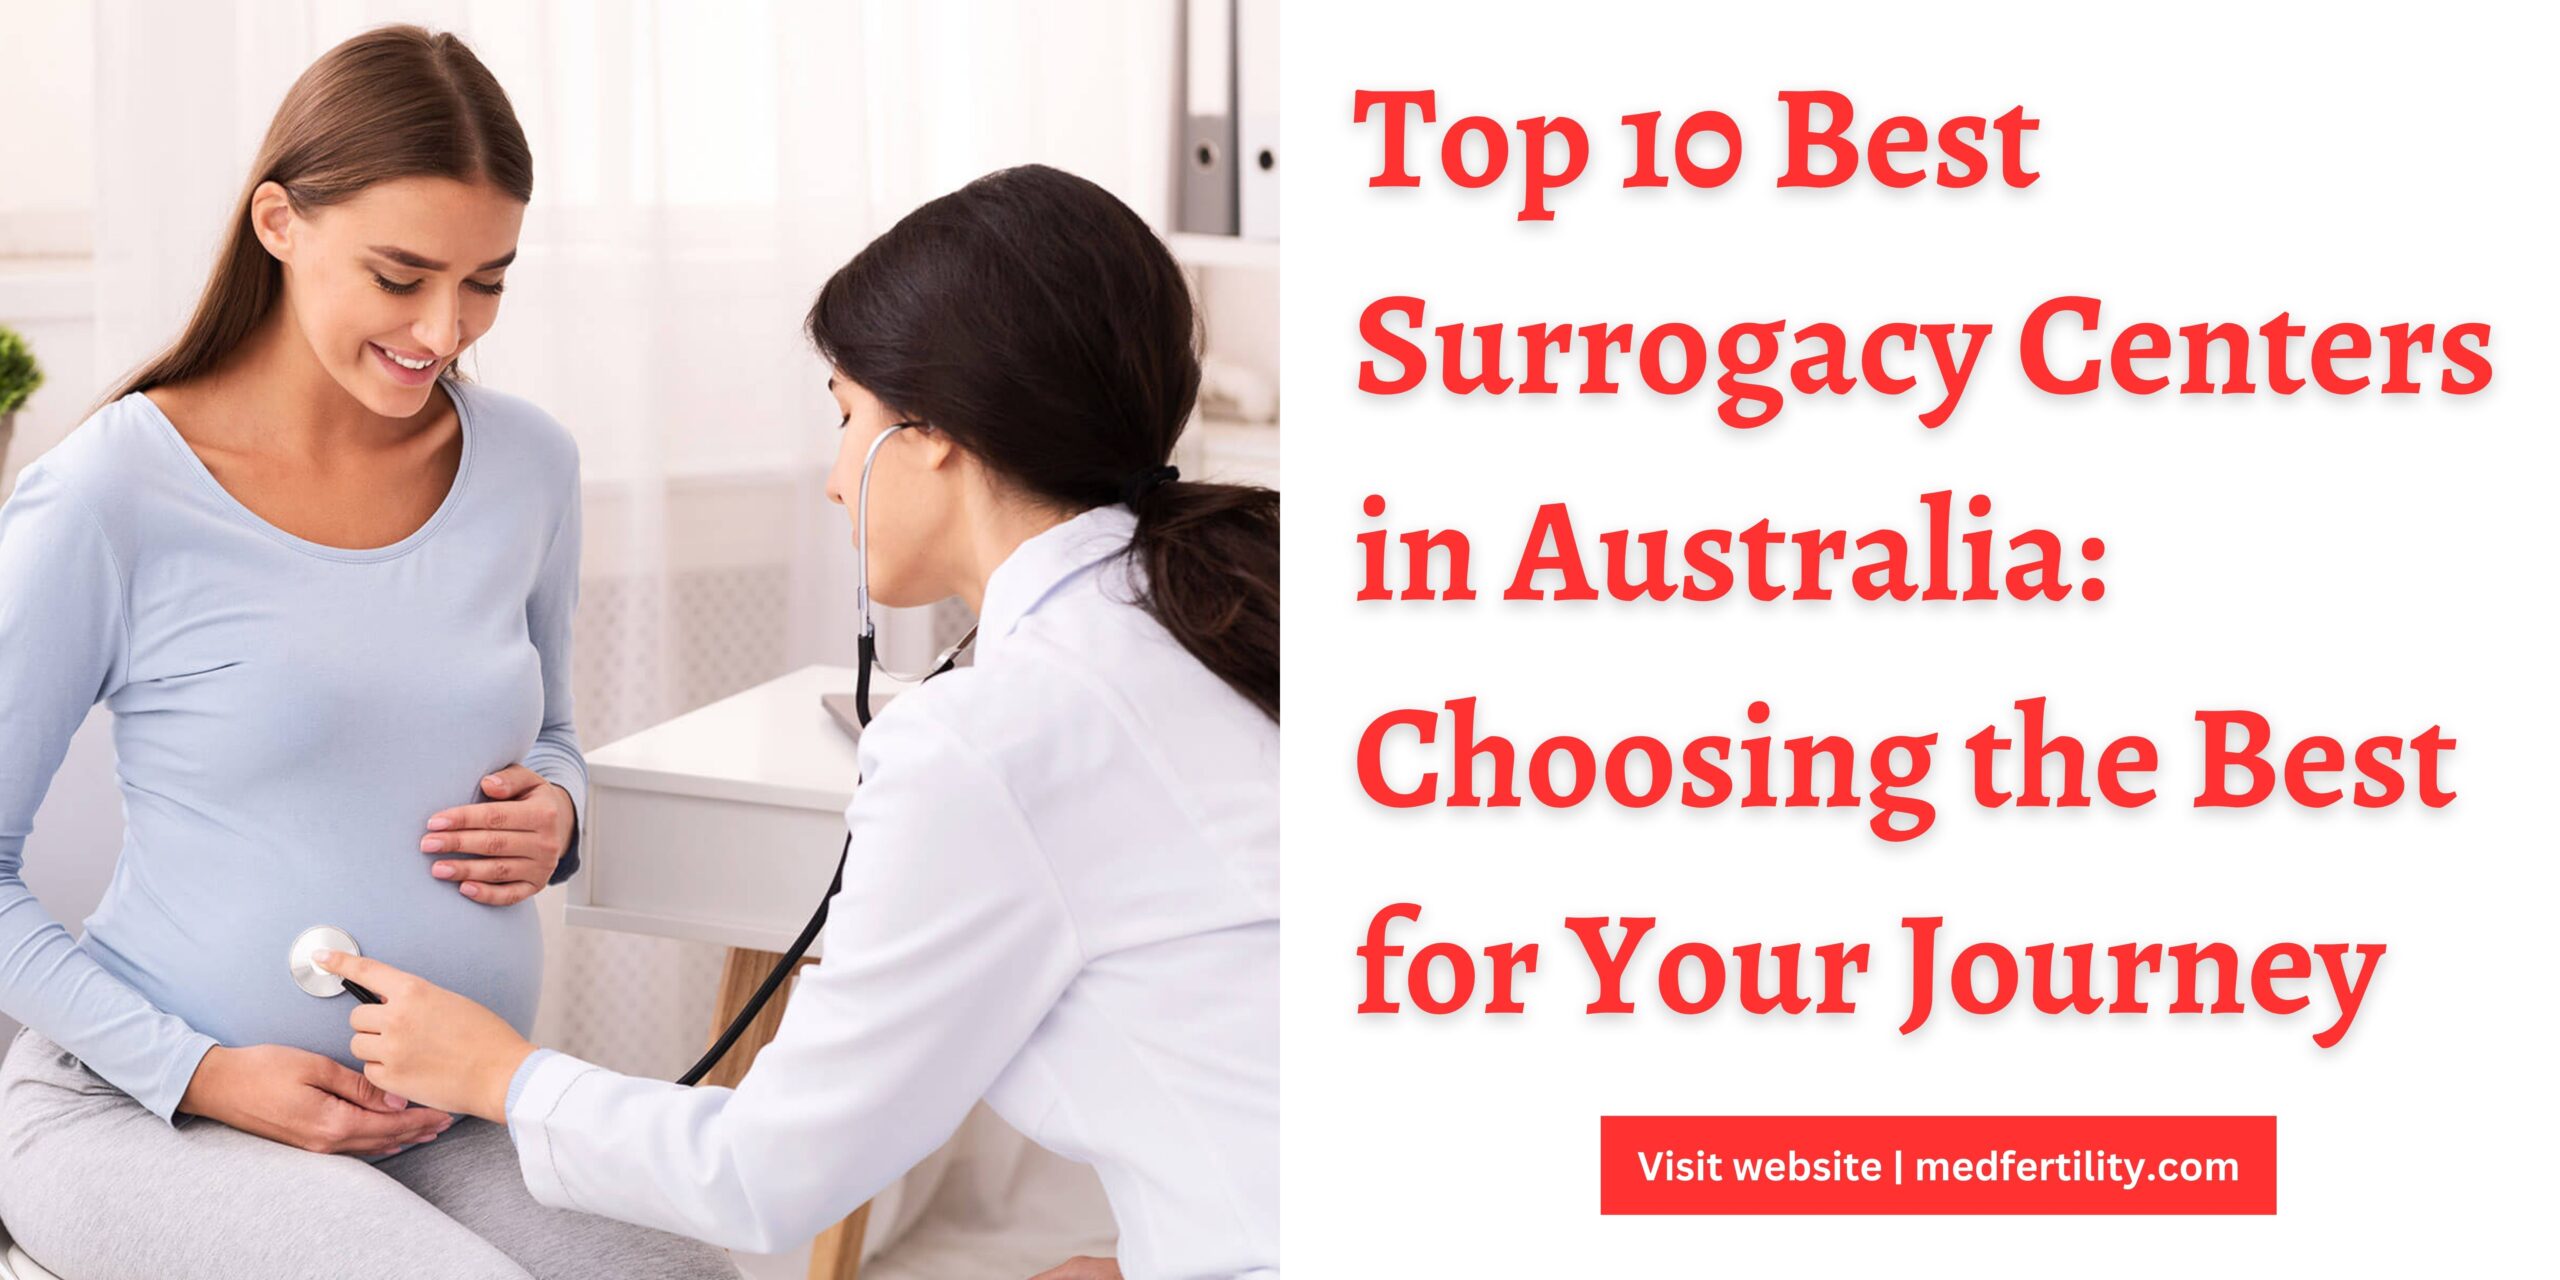 Top 10 Best Surrogacy Centers in Australia 2023: Choosing the Best for Your Journey